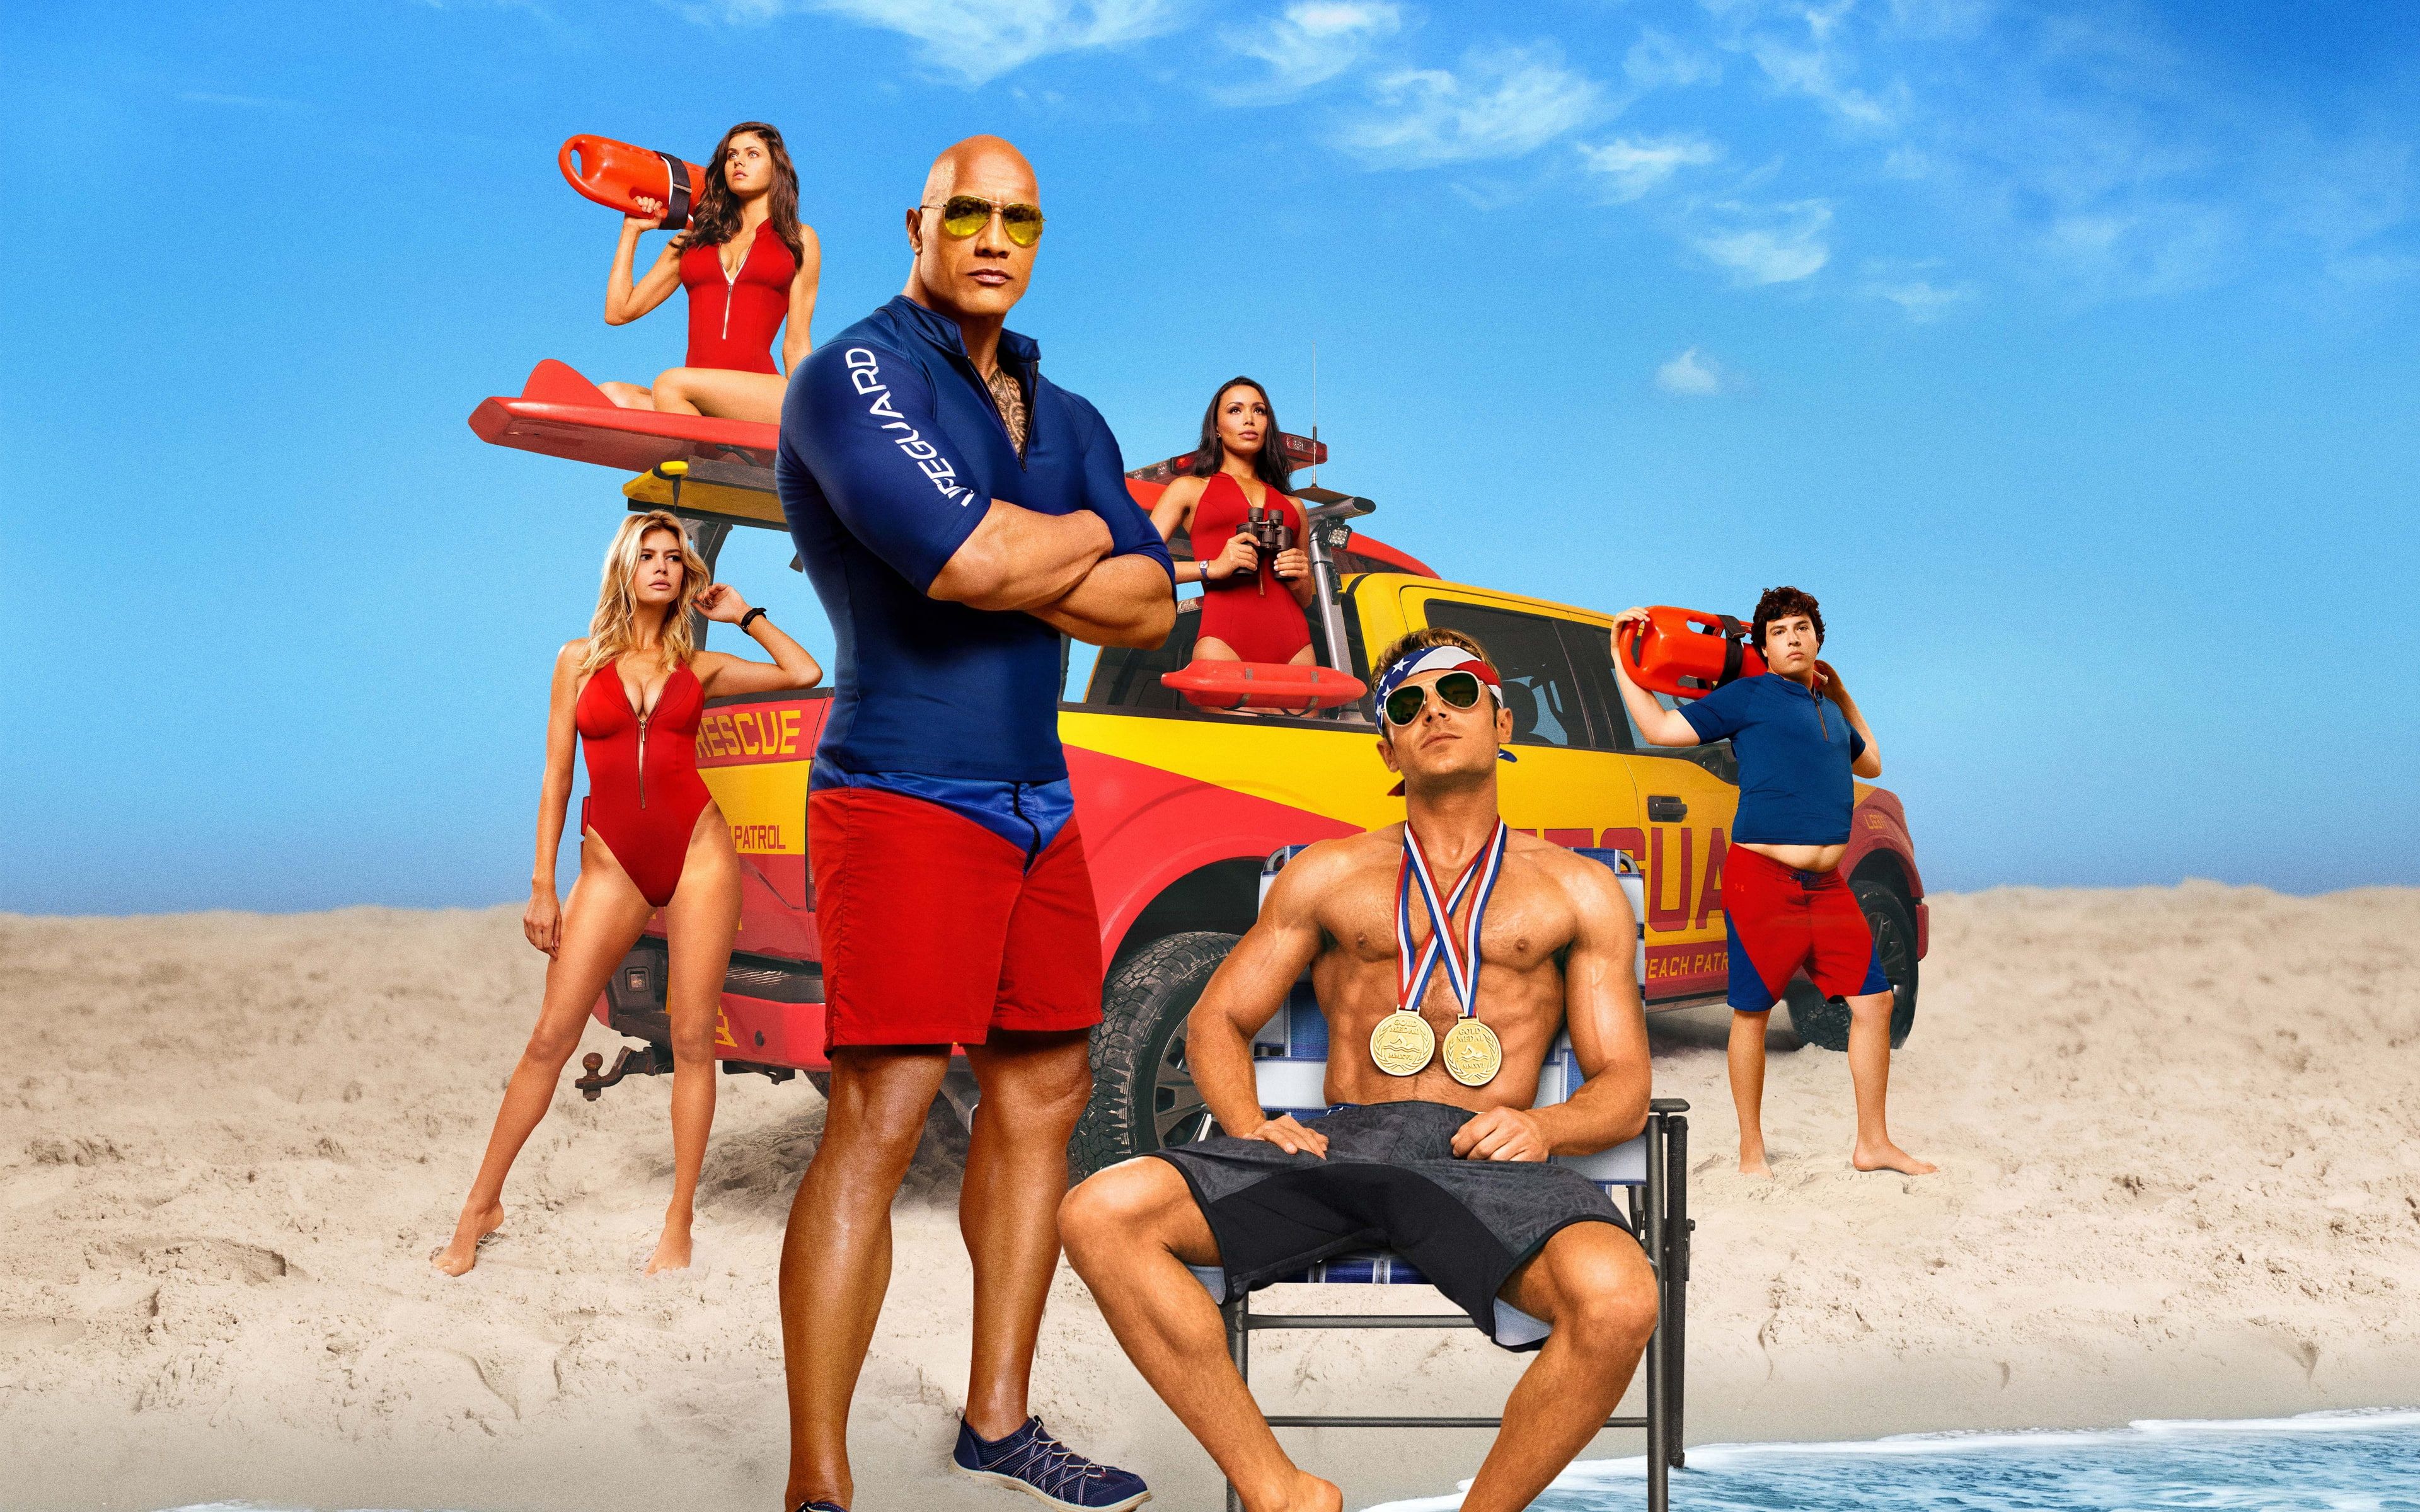 Dwayne 'The Rock' Johnson And Zac Efron In Baywatch Movie Wallpapers